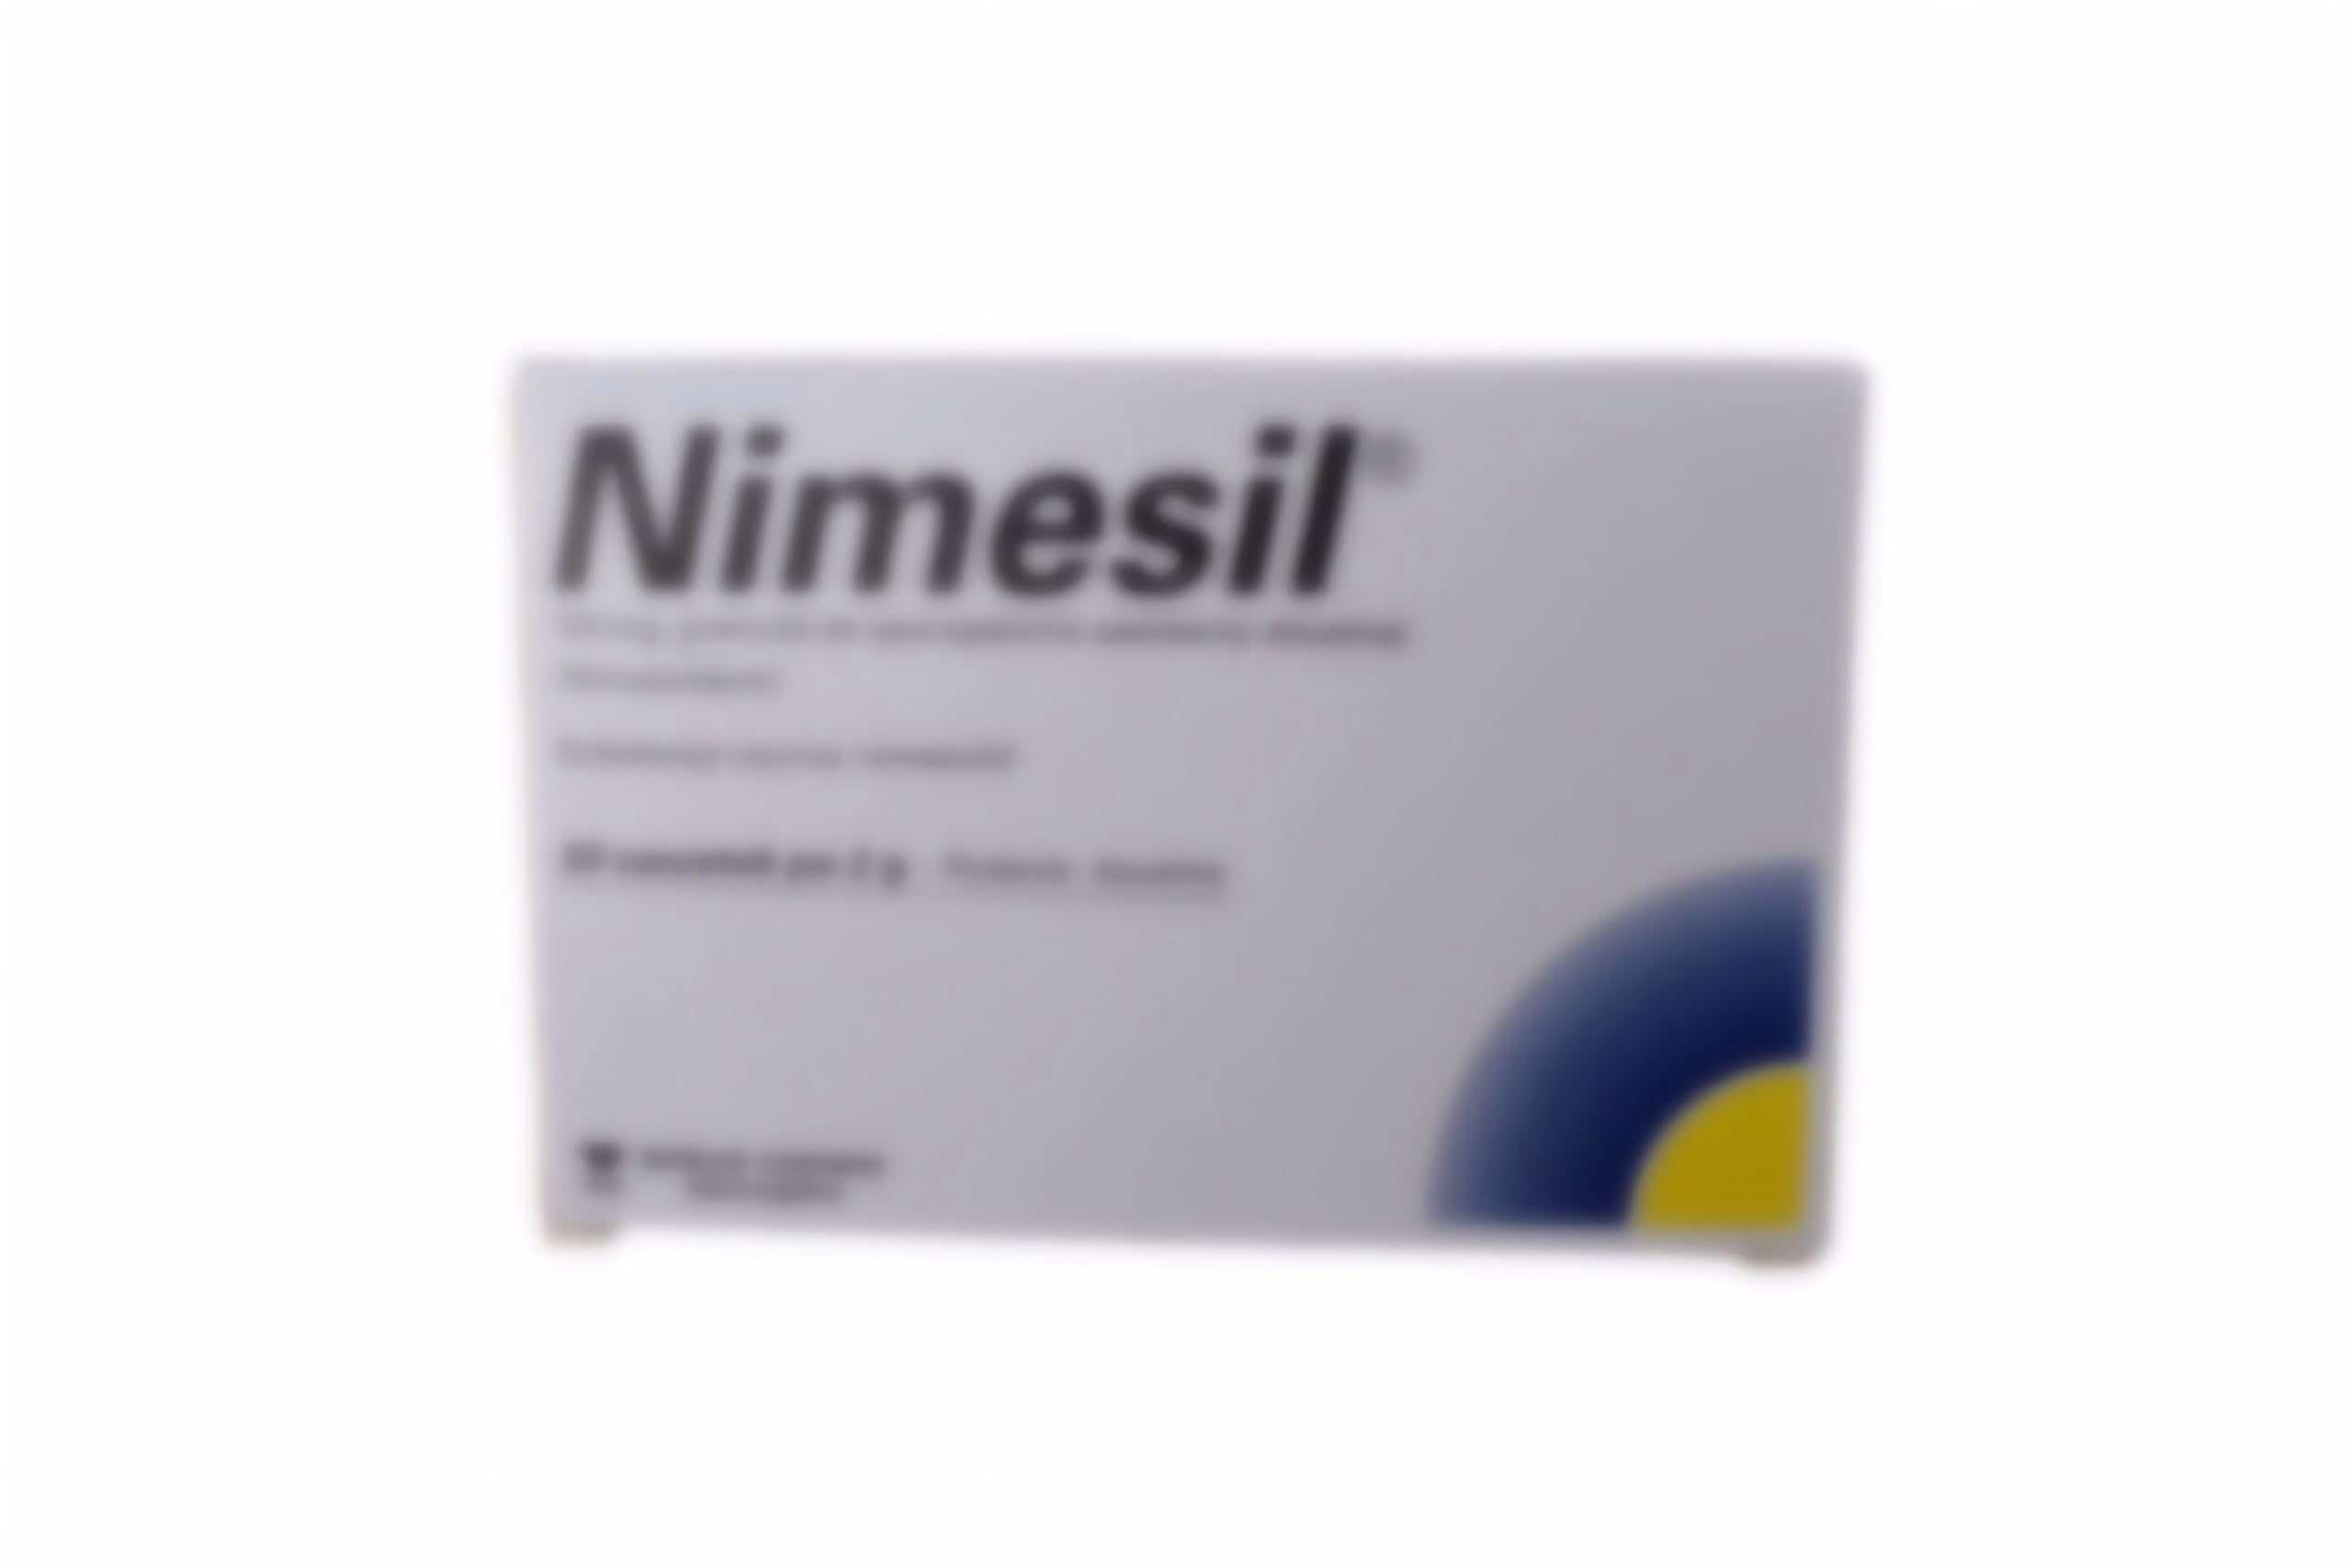 Marki Nimesil 30 sachets for Oral use Anti-inflammatory Agent with analgesic Properties